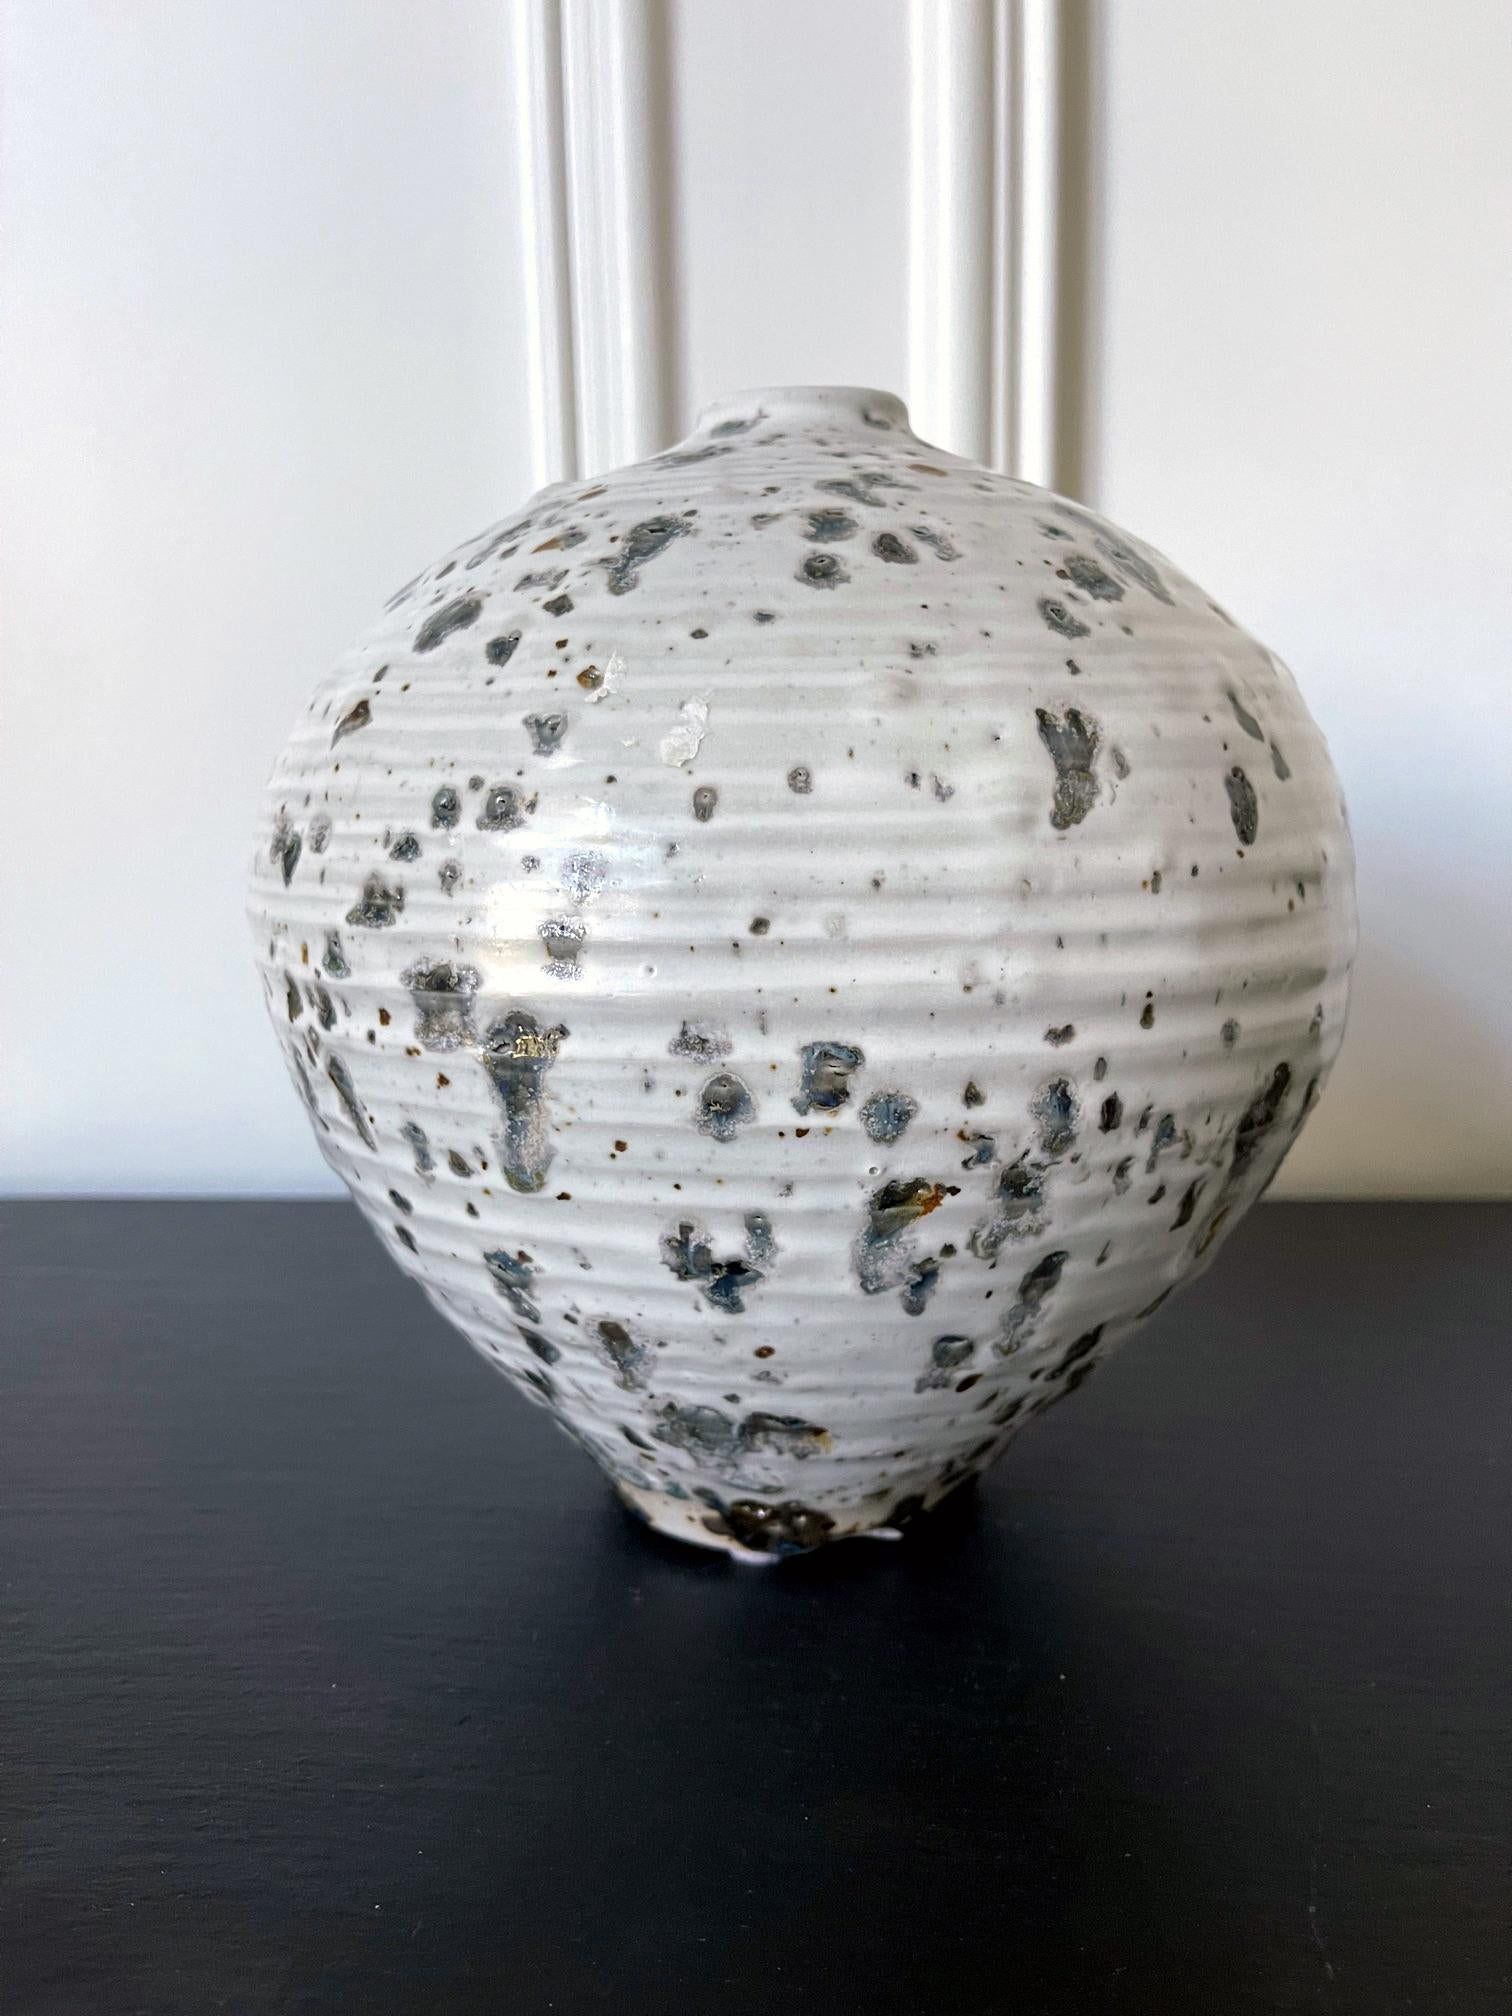 A ceramic vase in the form of a 